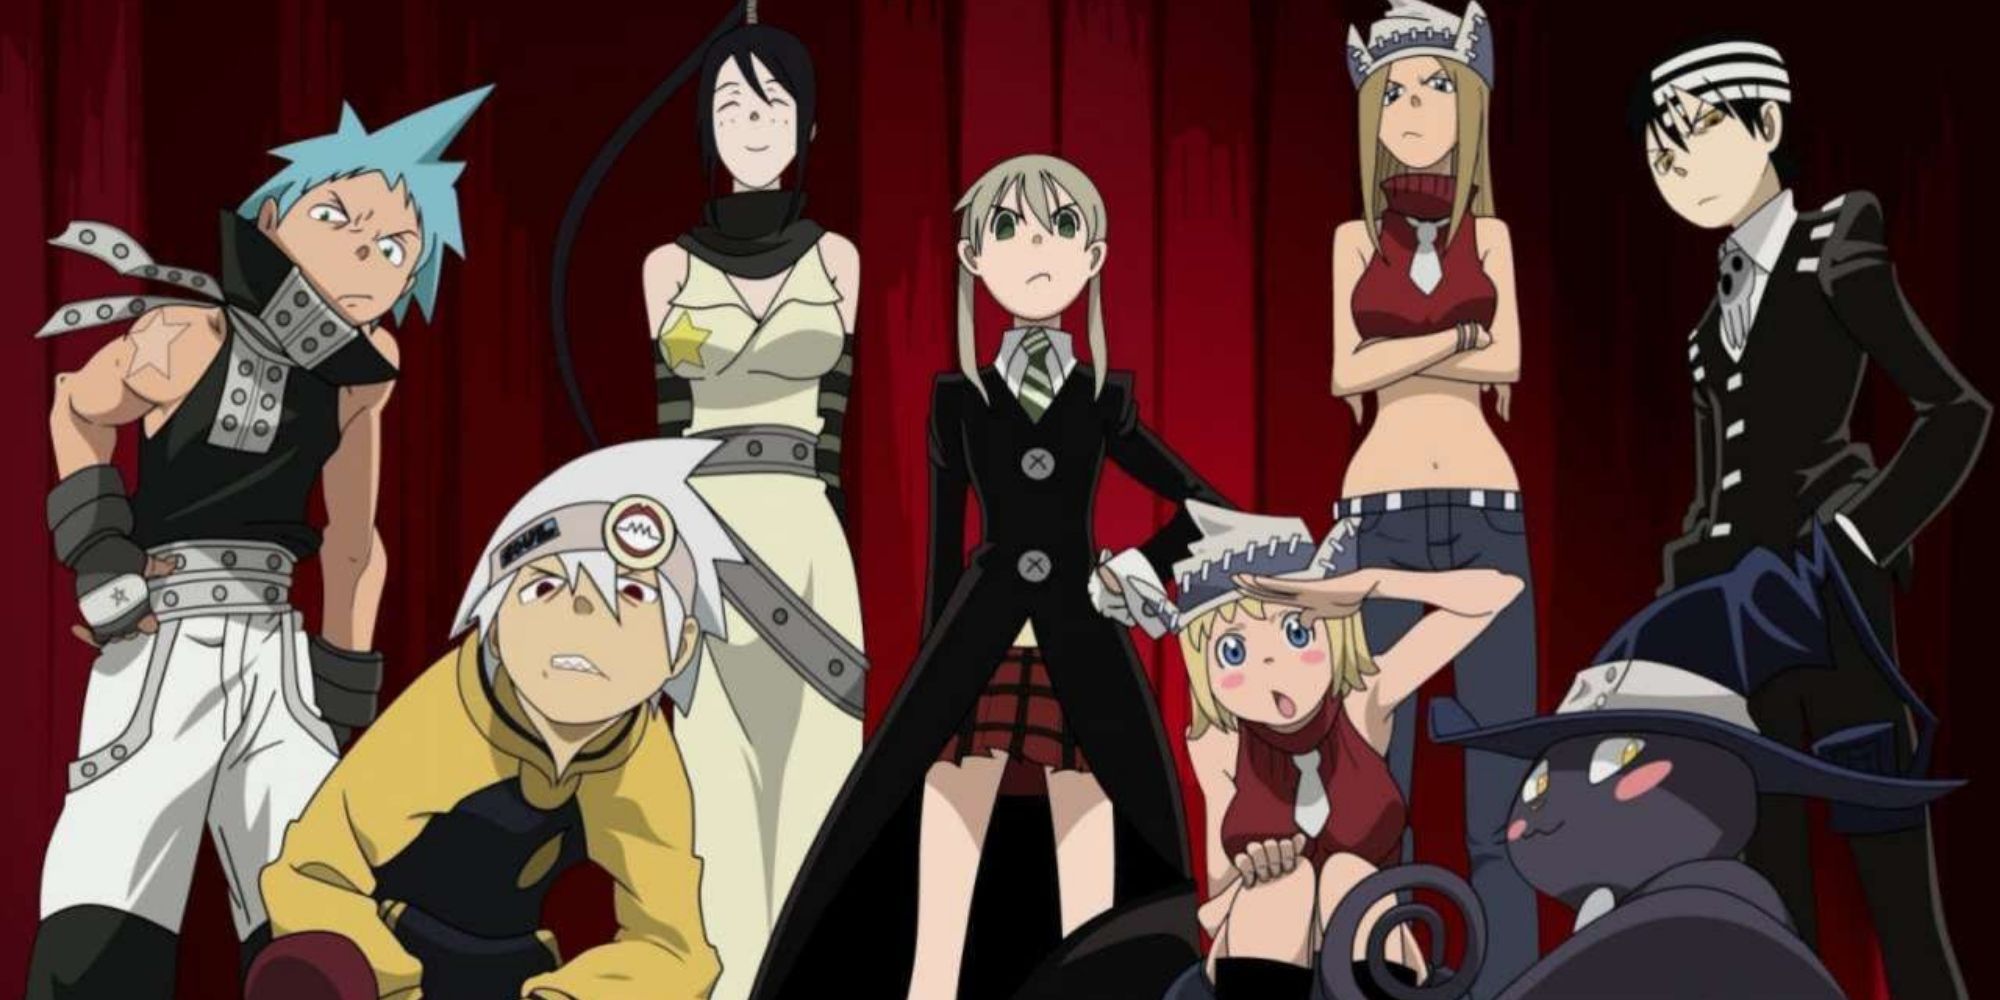 Soul Eater Differences between the Manga and Anime